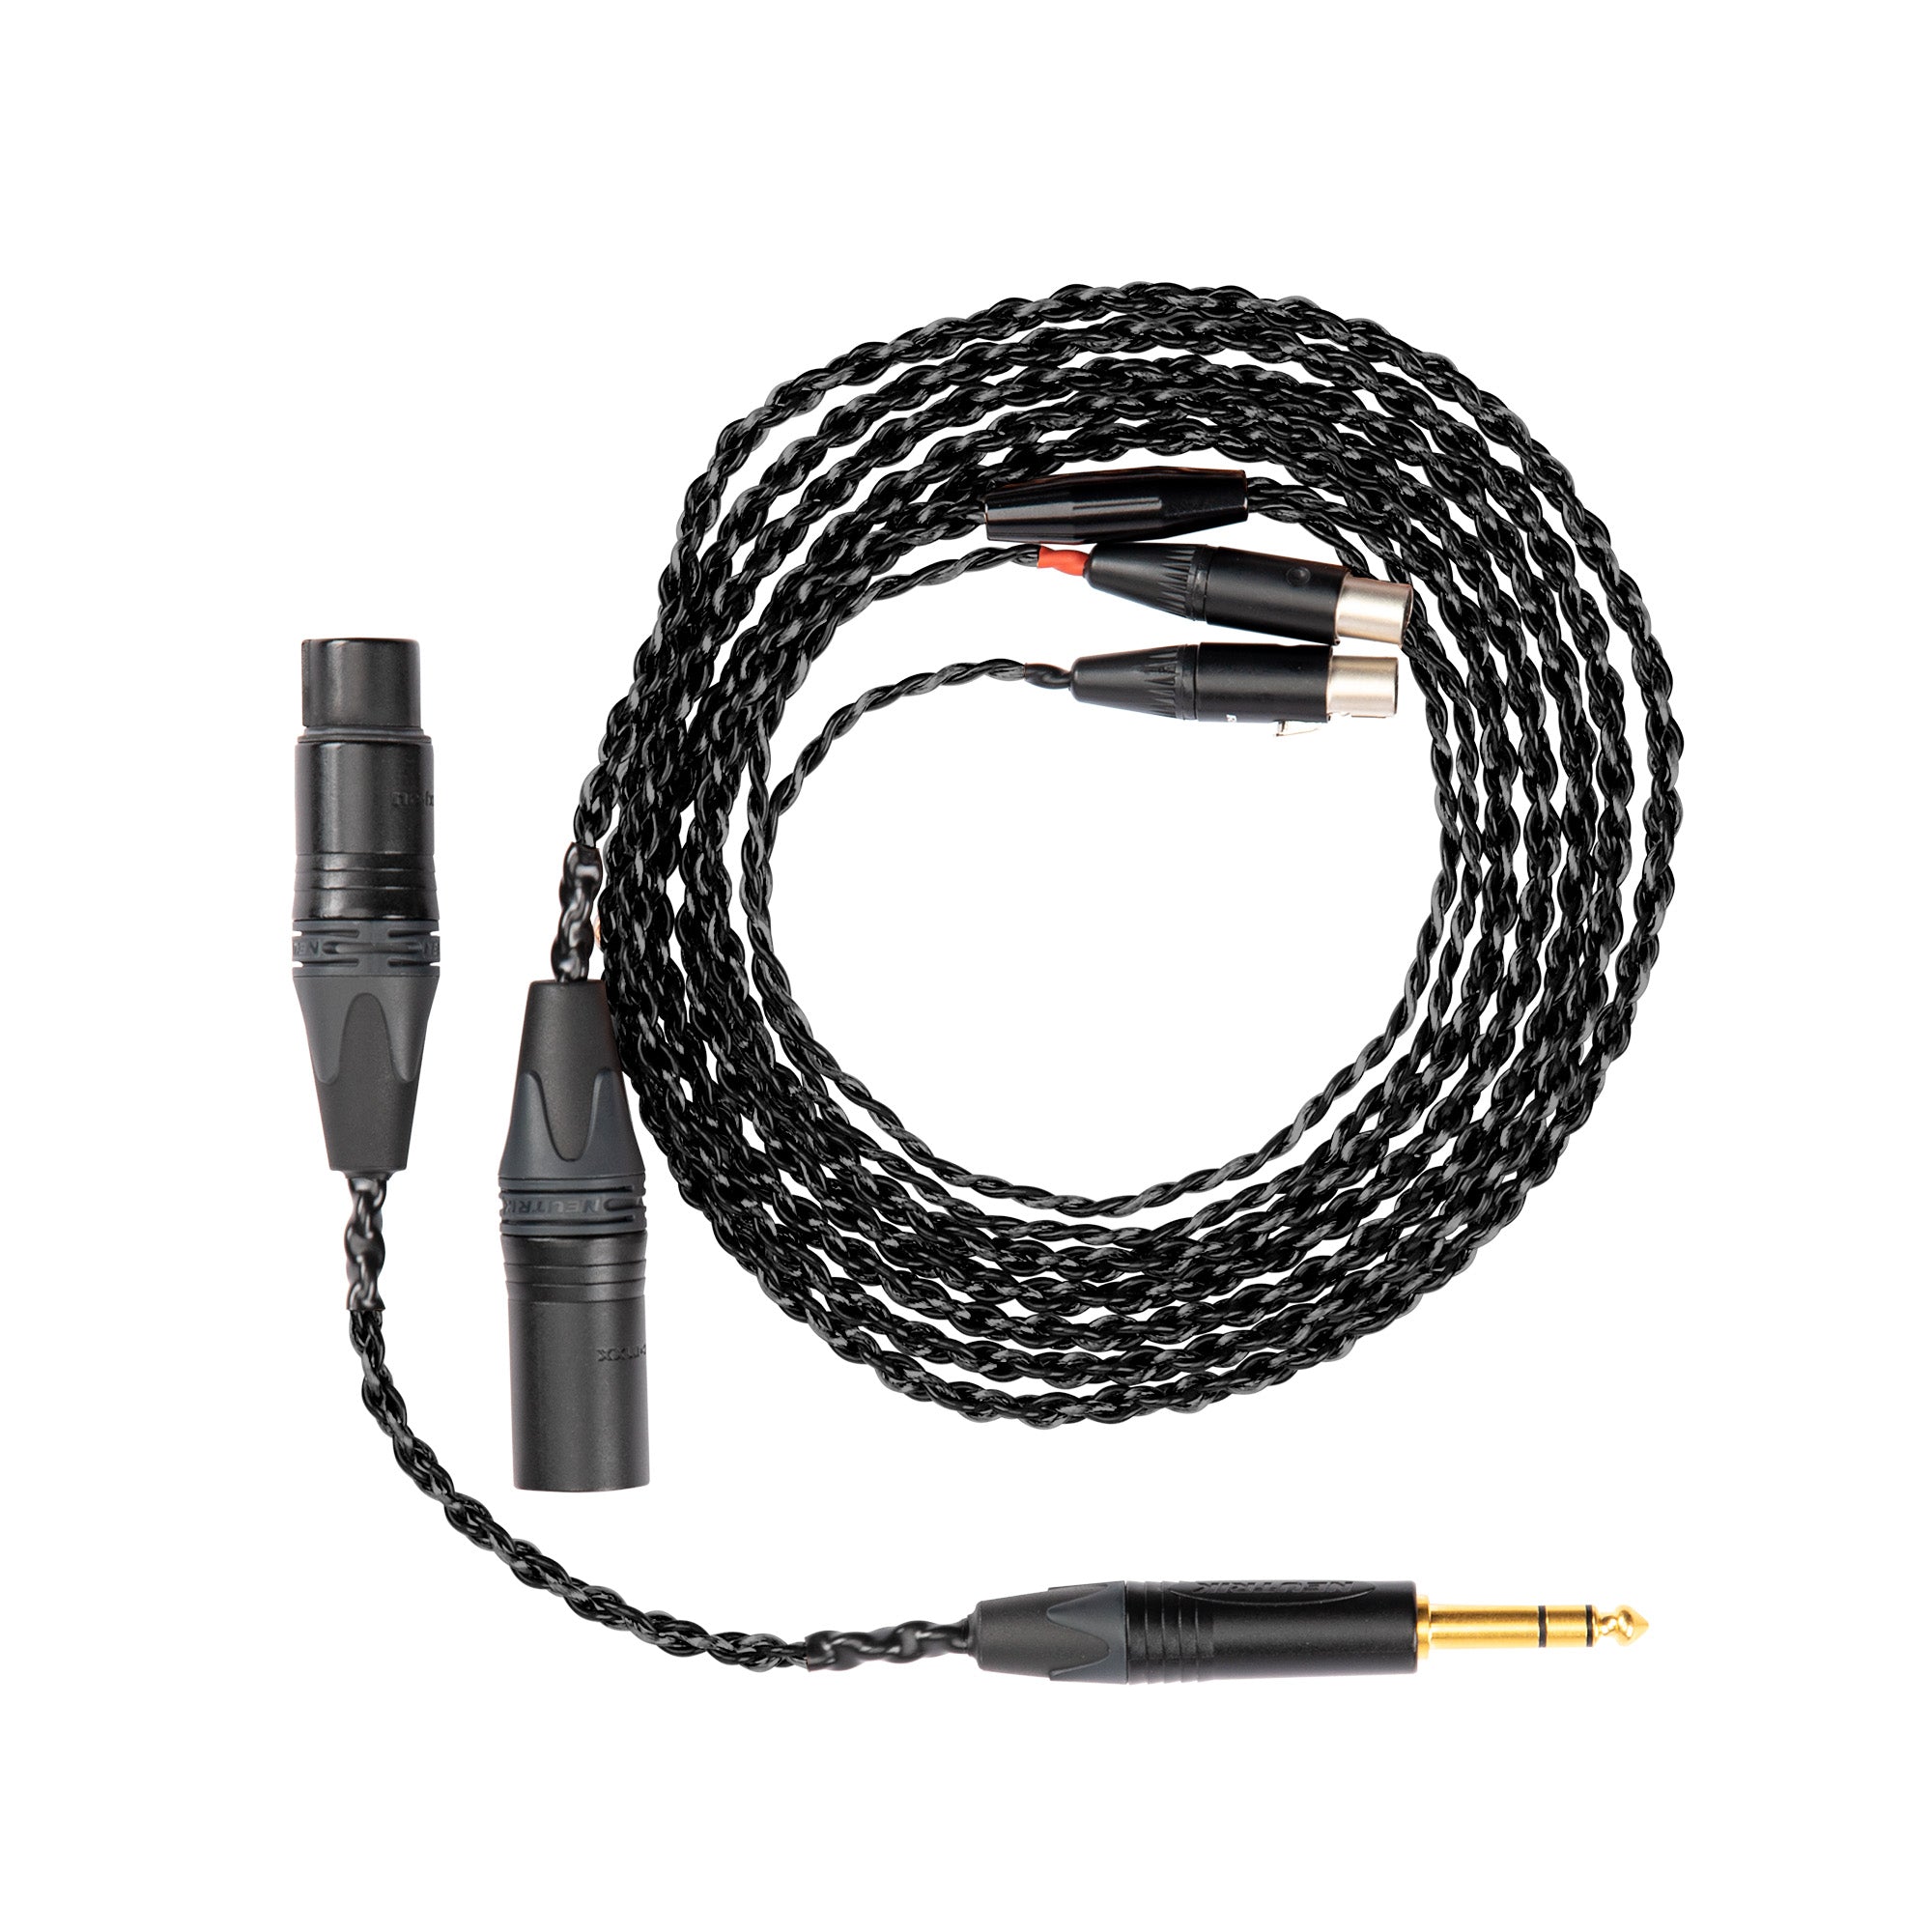 LCD Standard Combo Cable - Balanced XLR with 1/4" Single-ended Adapter